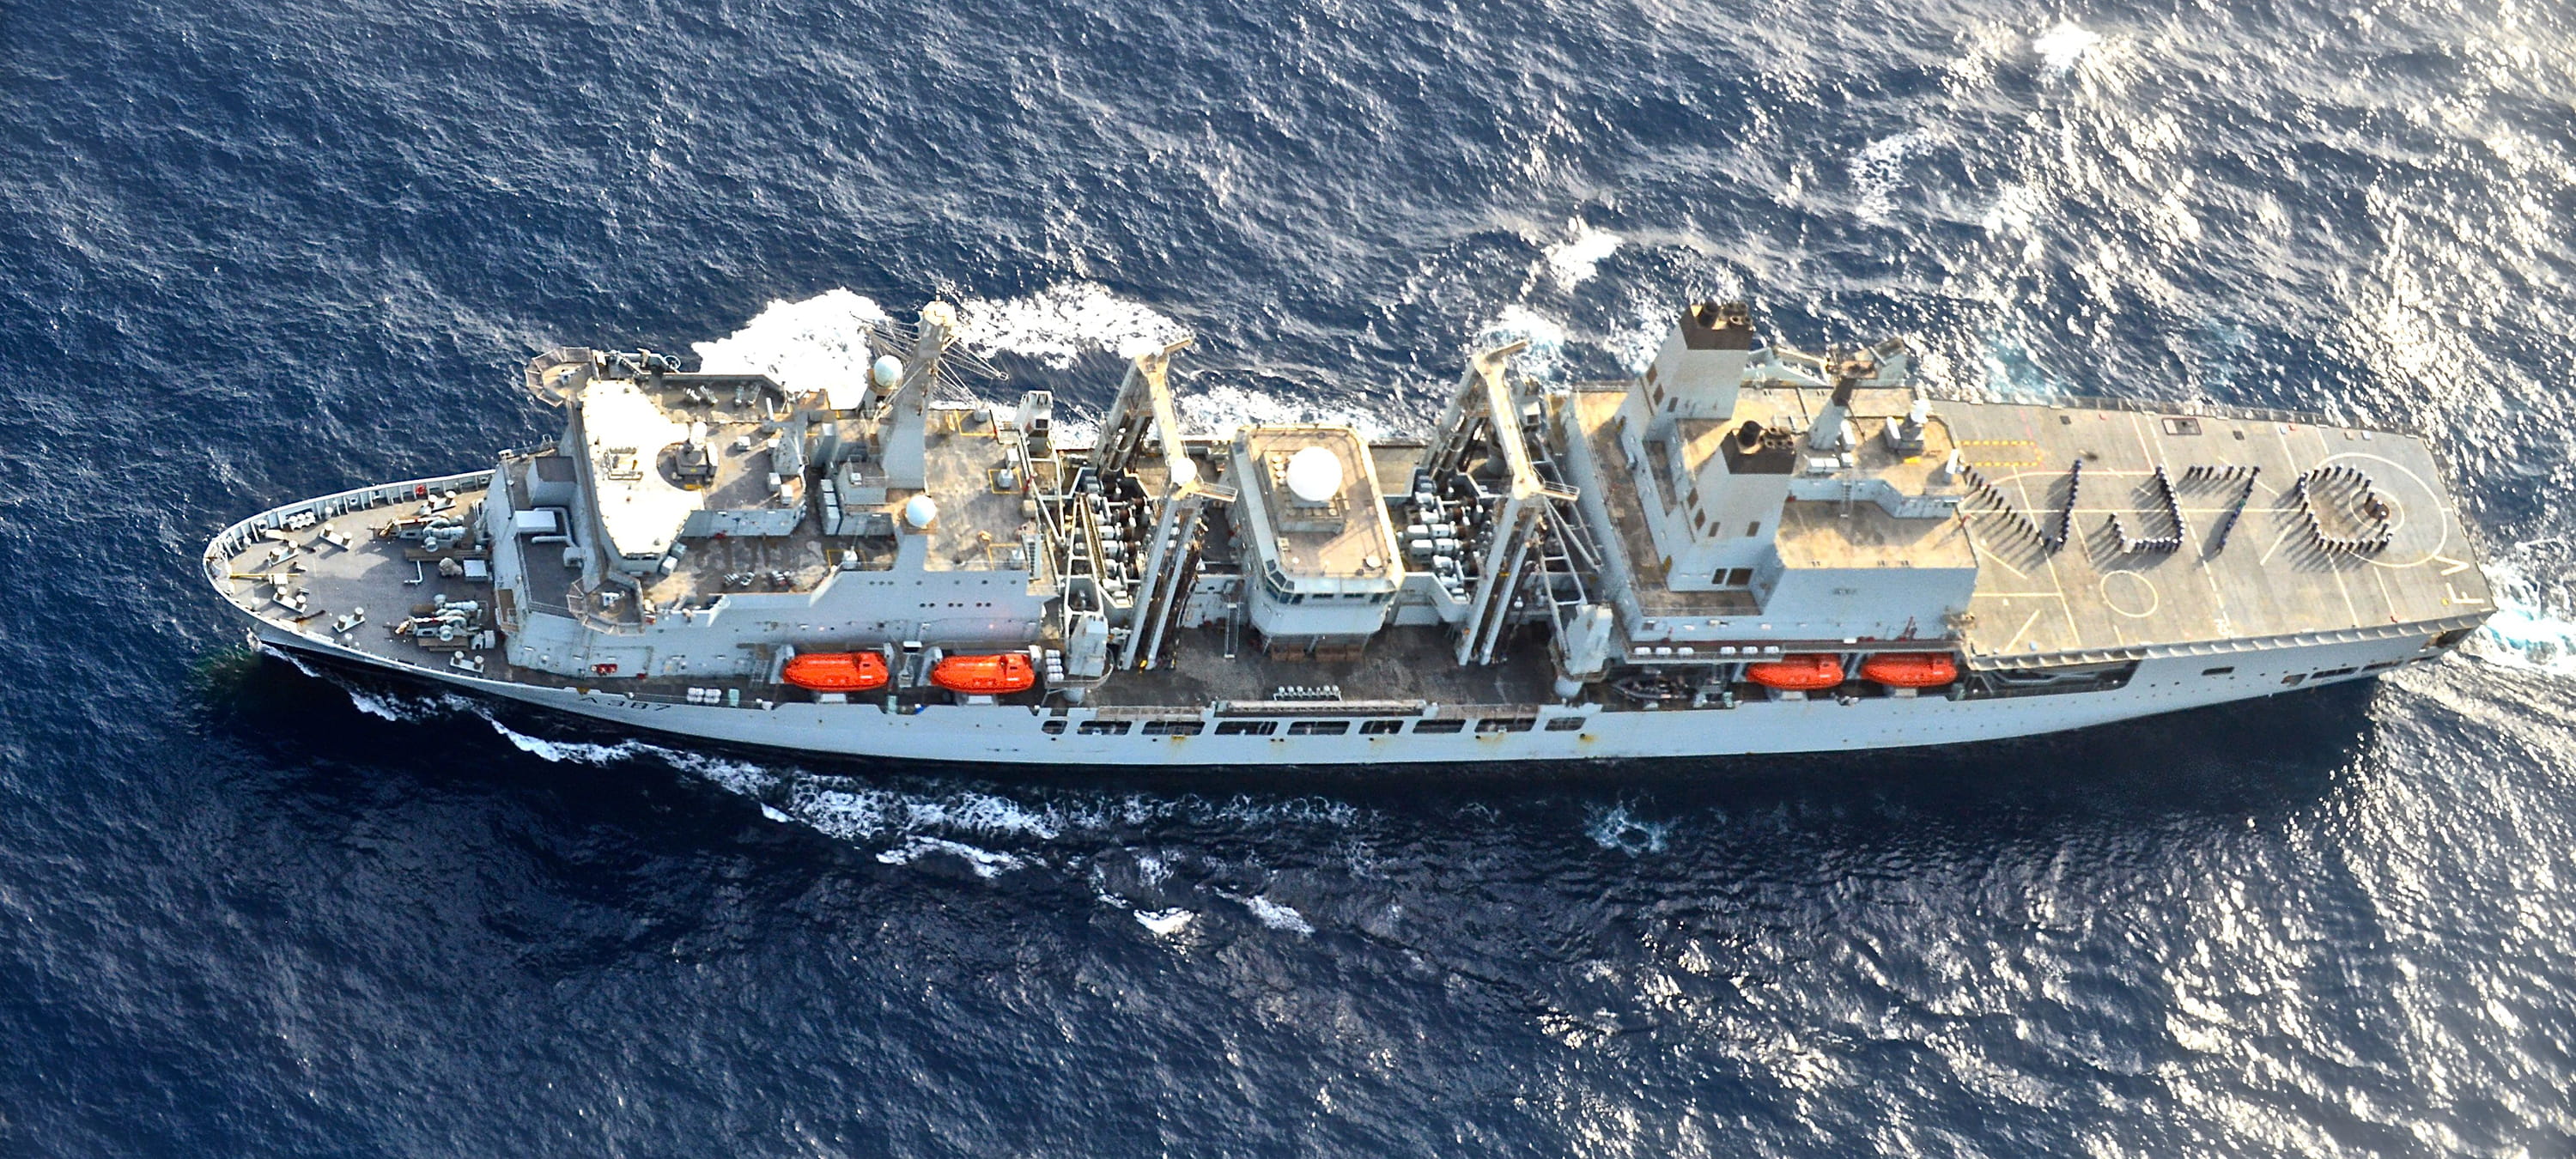 RFA Fort Victoria photgraphed from the air